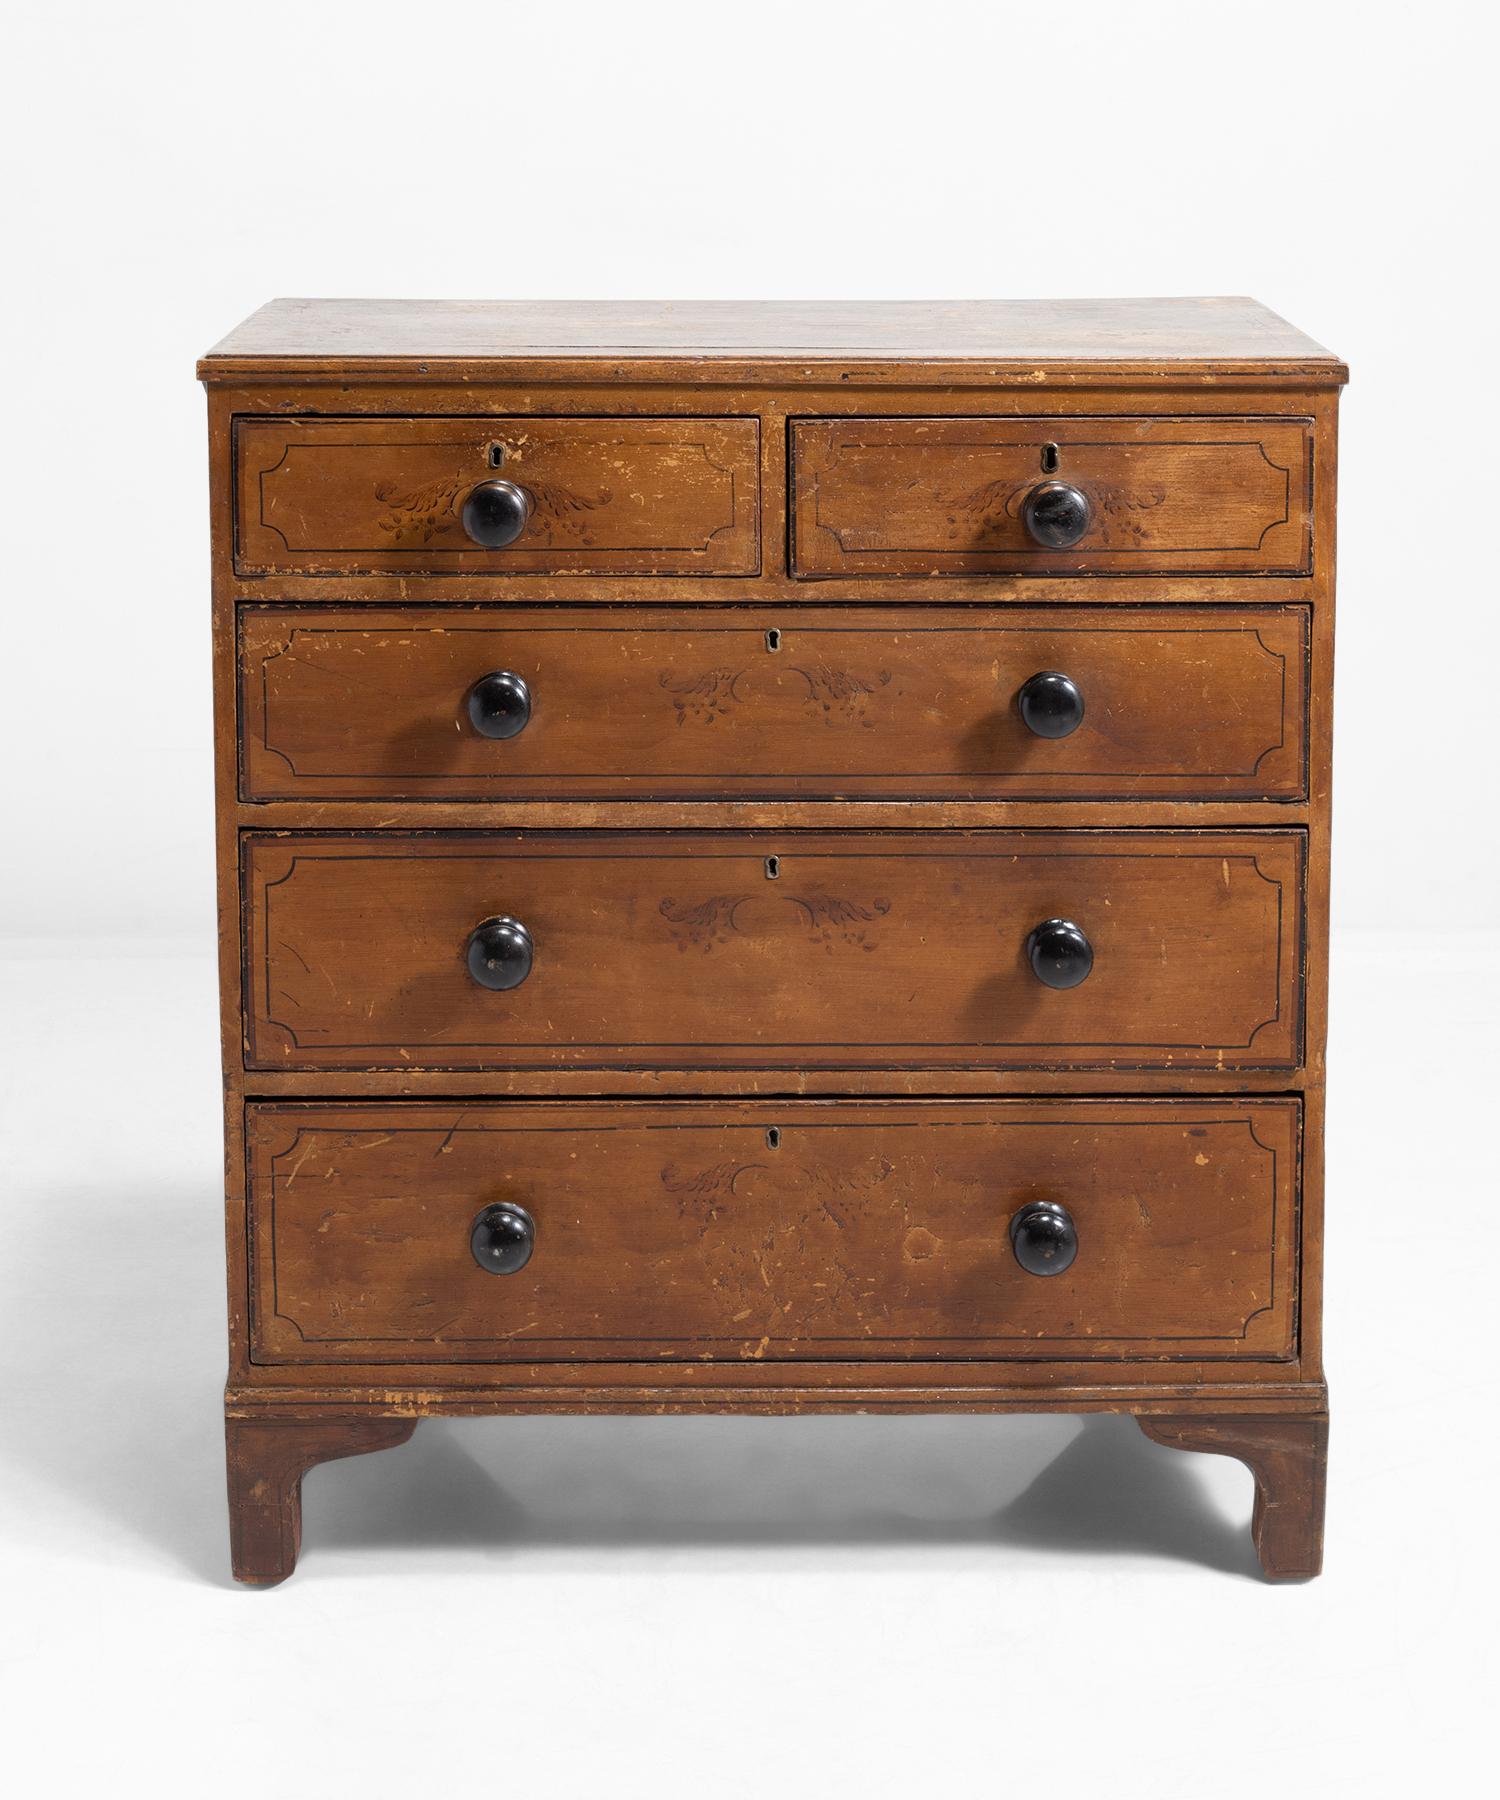 English Regency Chest of Drawers